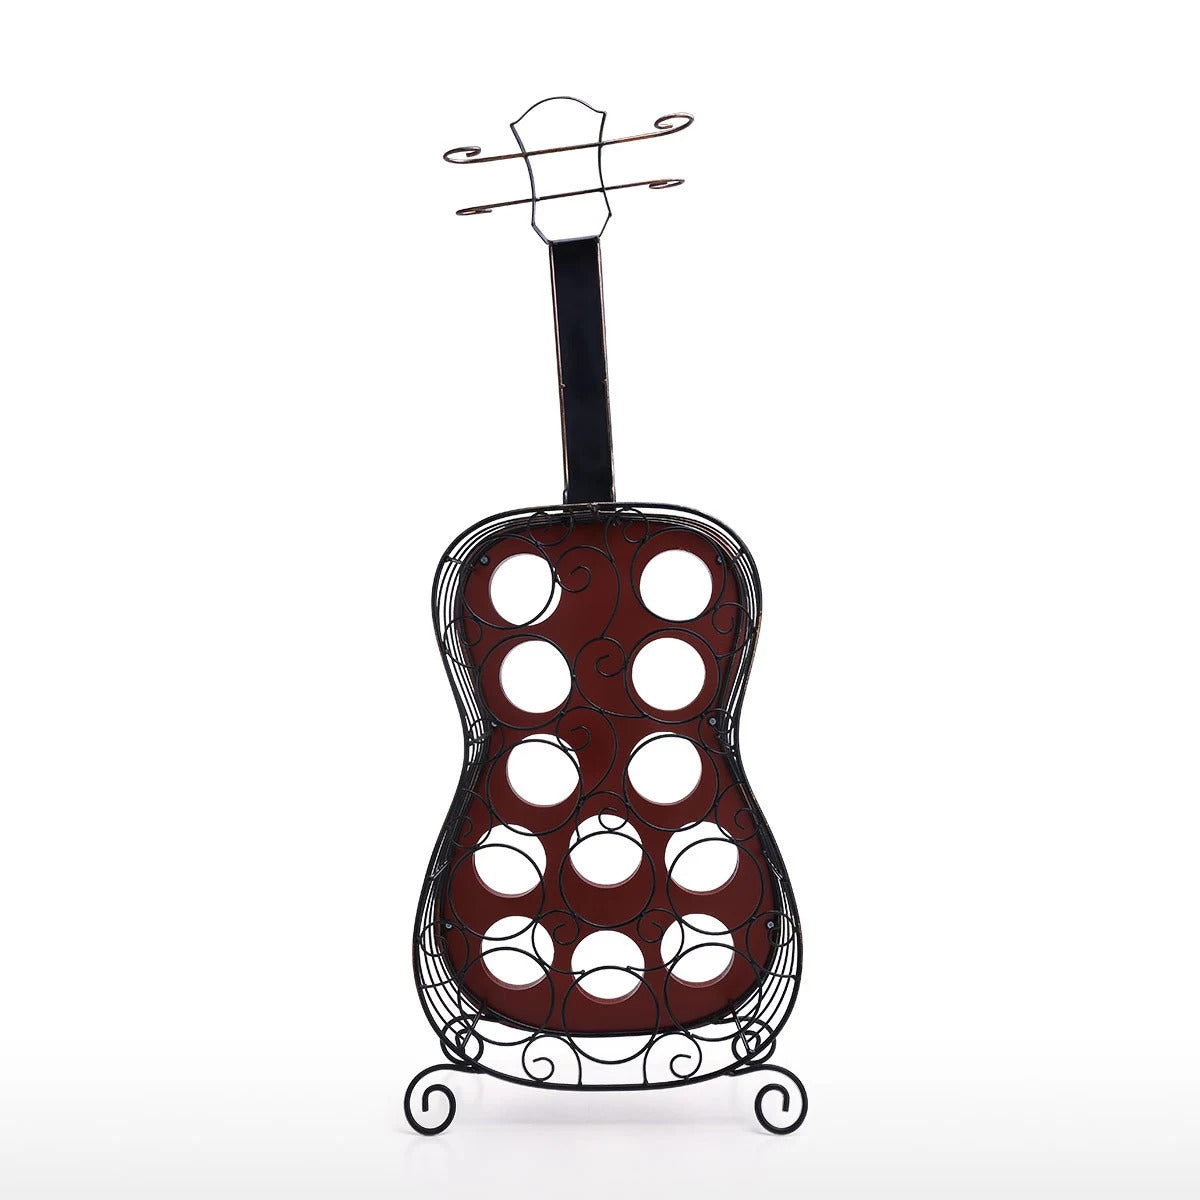 12 Bottle Wine Rack Holder by Guitar Decor Ornament Gifts for Music & Wine Lovers